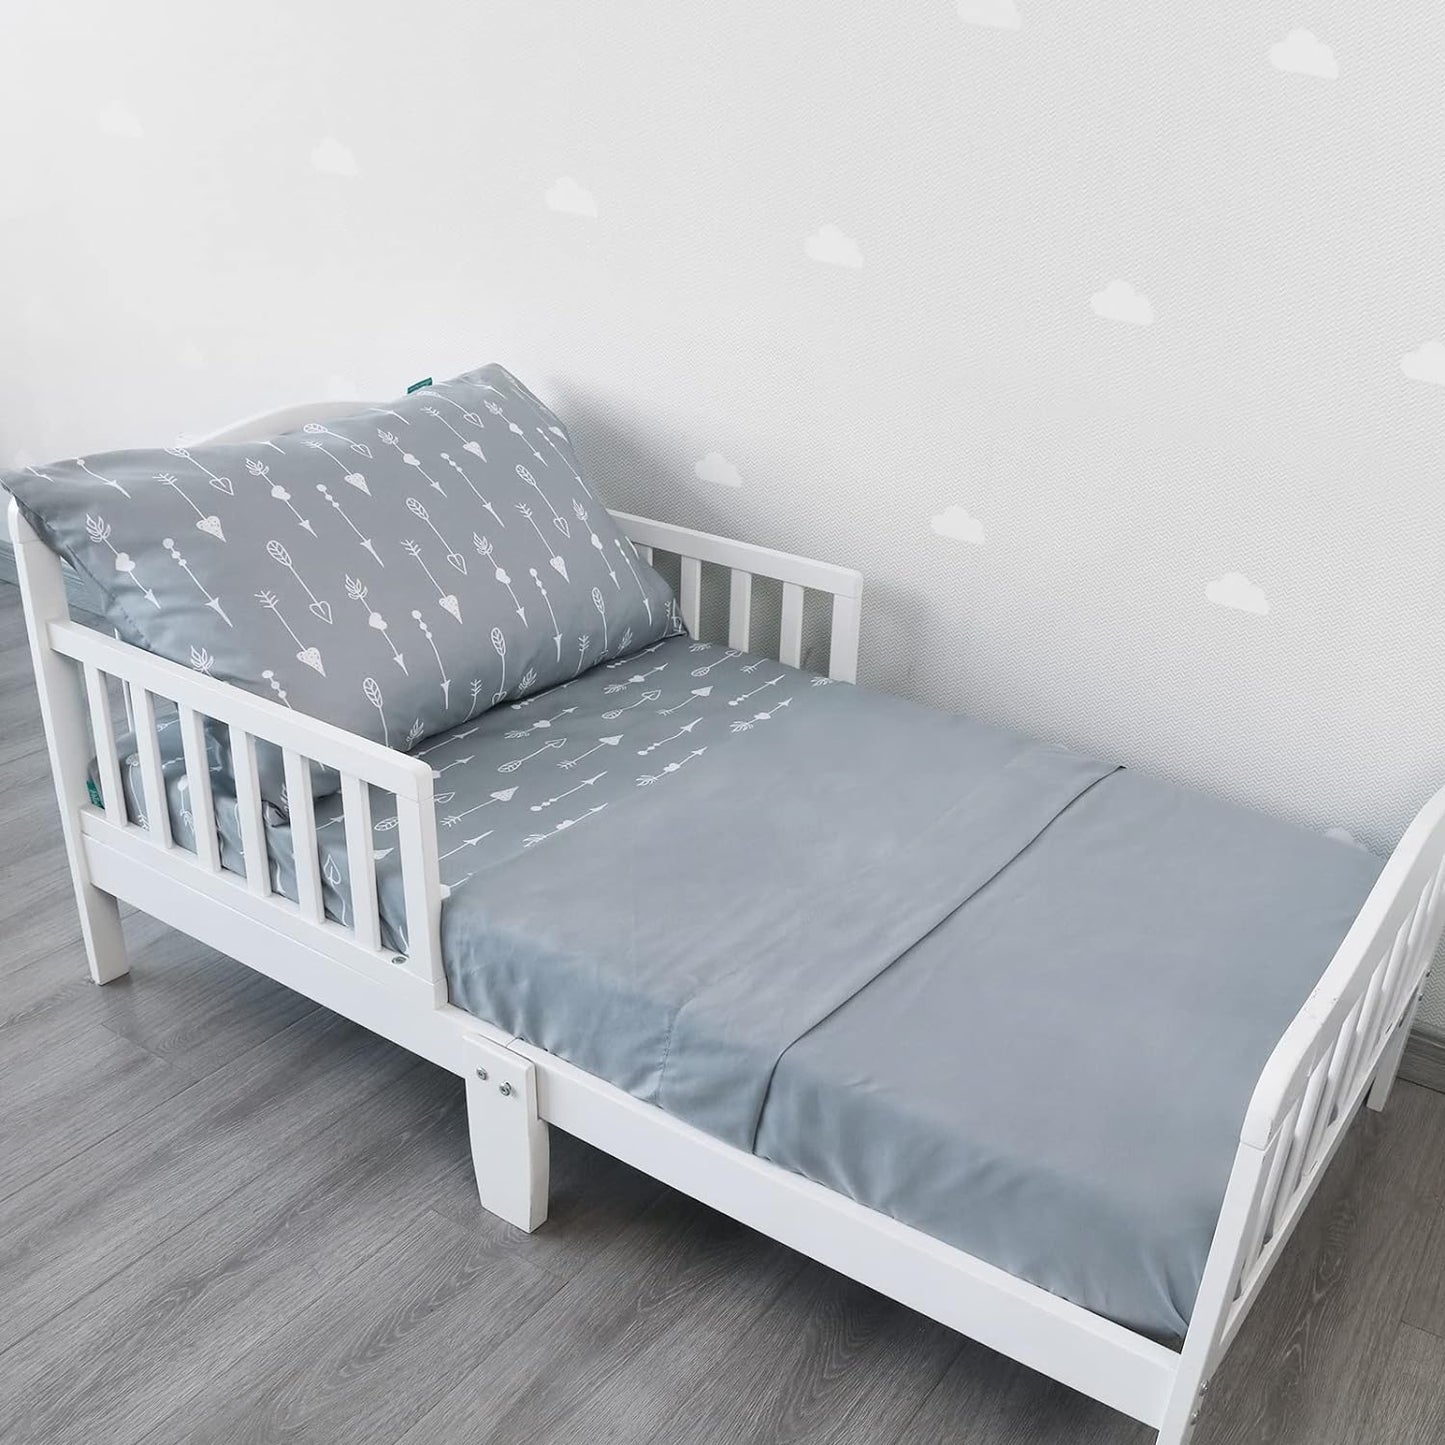 Toddler Bedding Set - 3 Pieces, Includes a Crib Fitted Sheet, Flat Sheet and Envelope Pillowcase, Soft and Breathable, Grey Arrow - Biloban Online Store